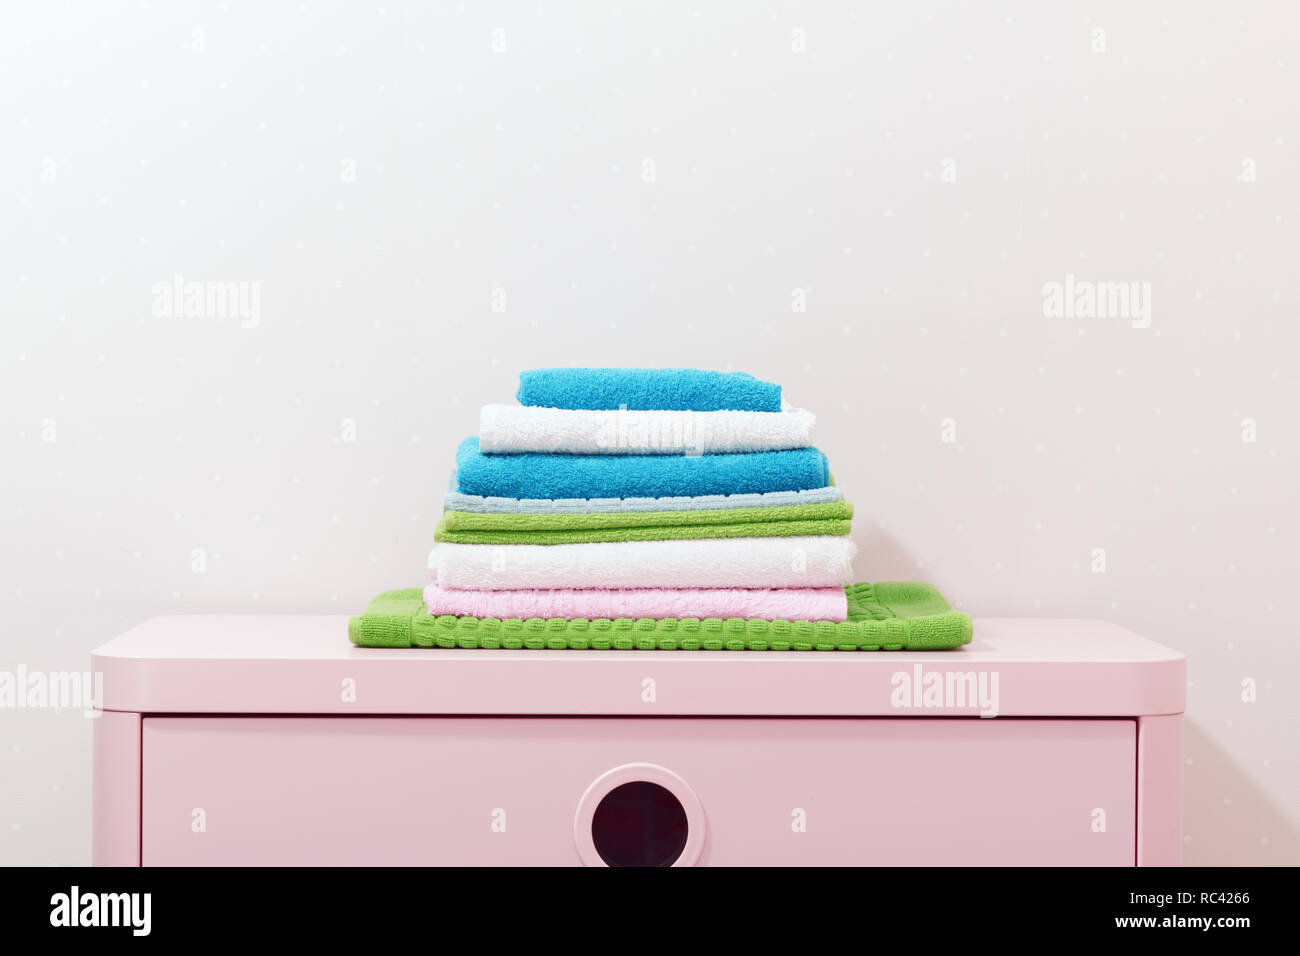 On the chest lies a stack of stacked colorful towels. Stock Photo